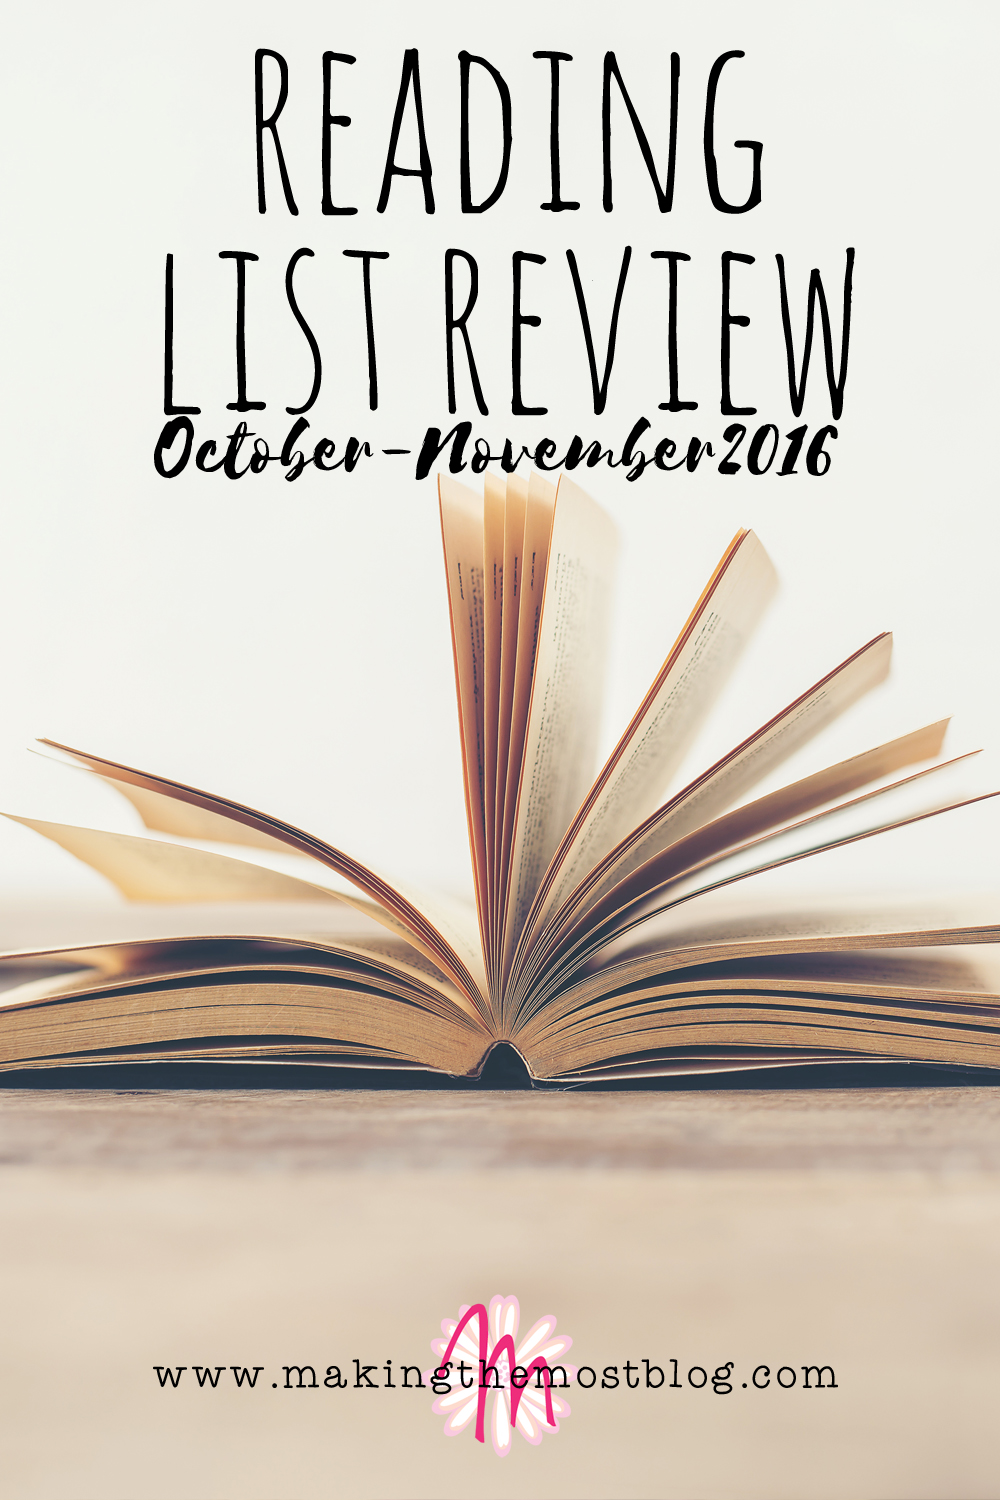 Reading List Review: October-November 2016 | Making the Most Blog